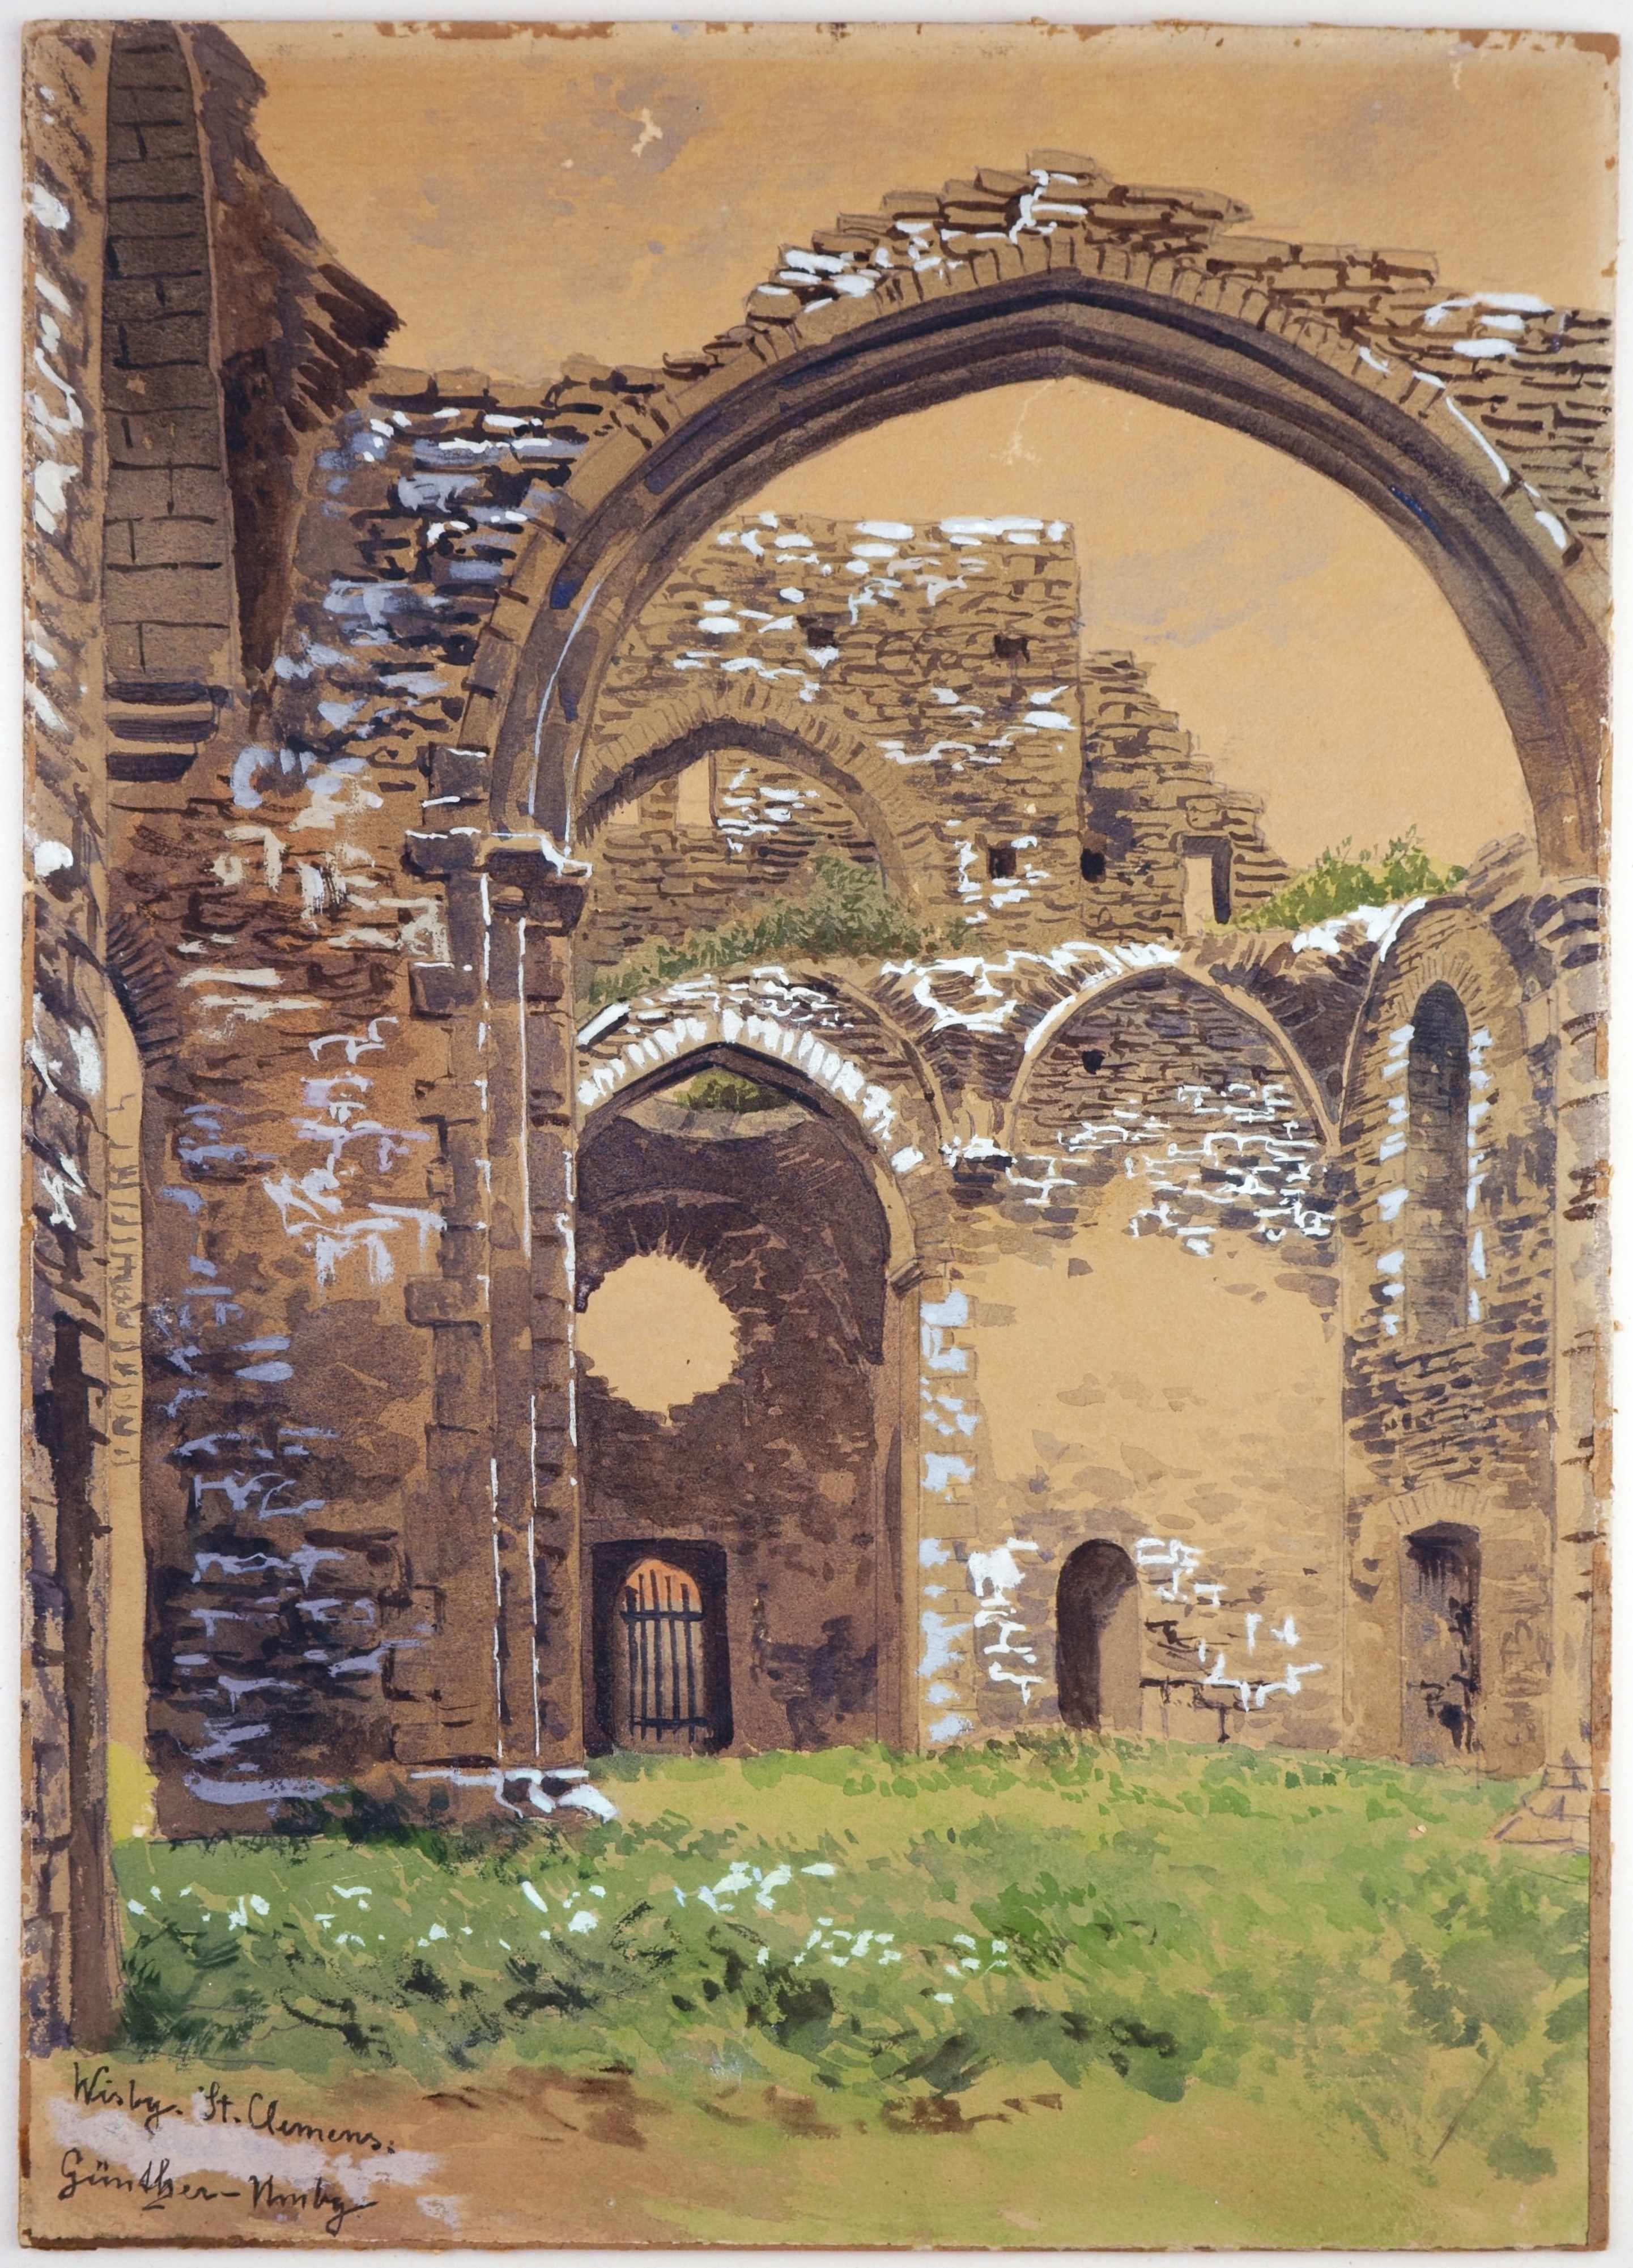 The Ruins of St. Clement's Church in Visby, Sweden / - Real romanticism -